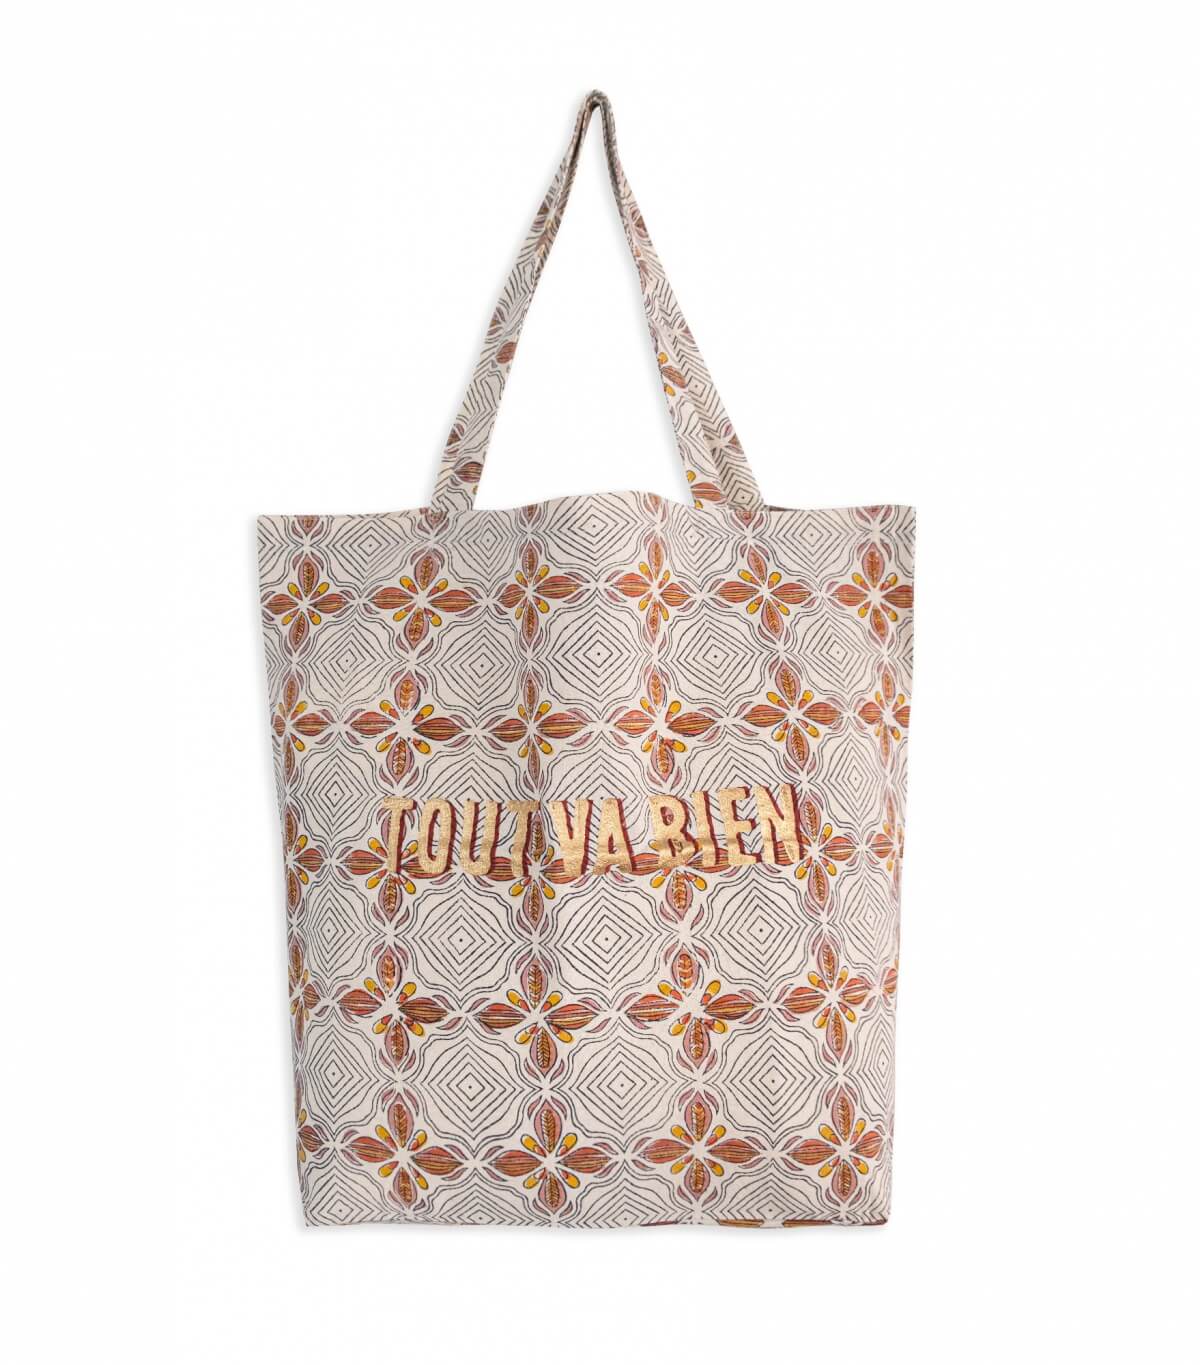 Buy Vuitton Shopping Bag Online In India -  India